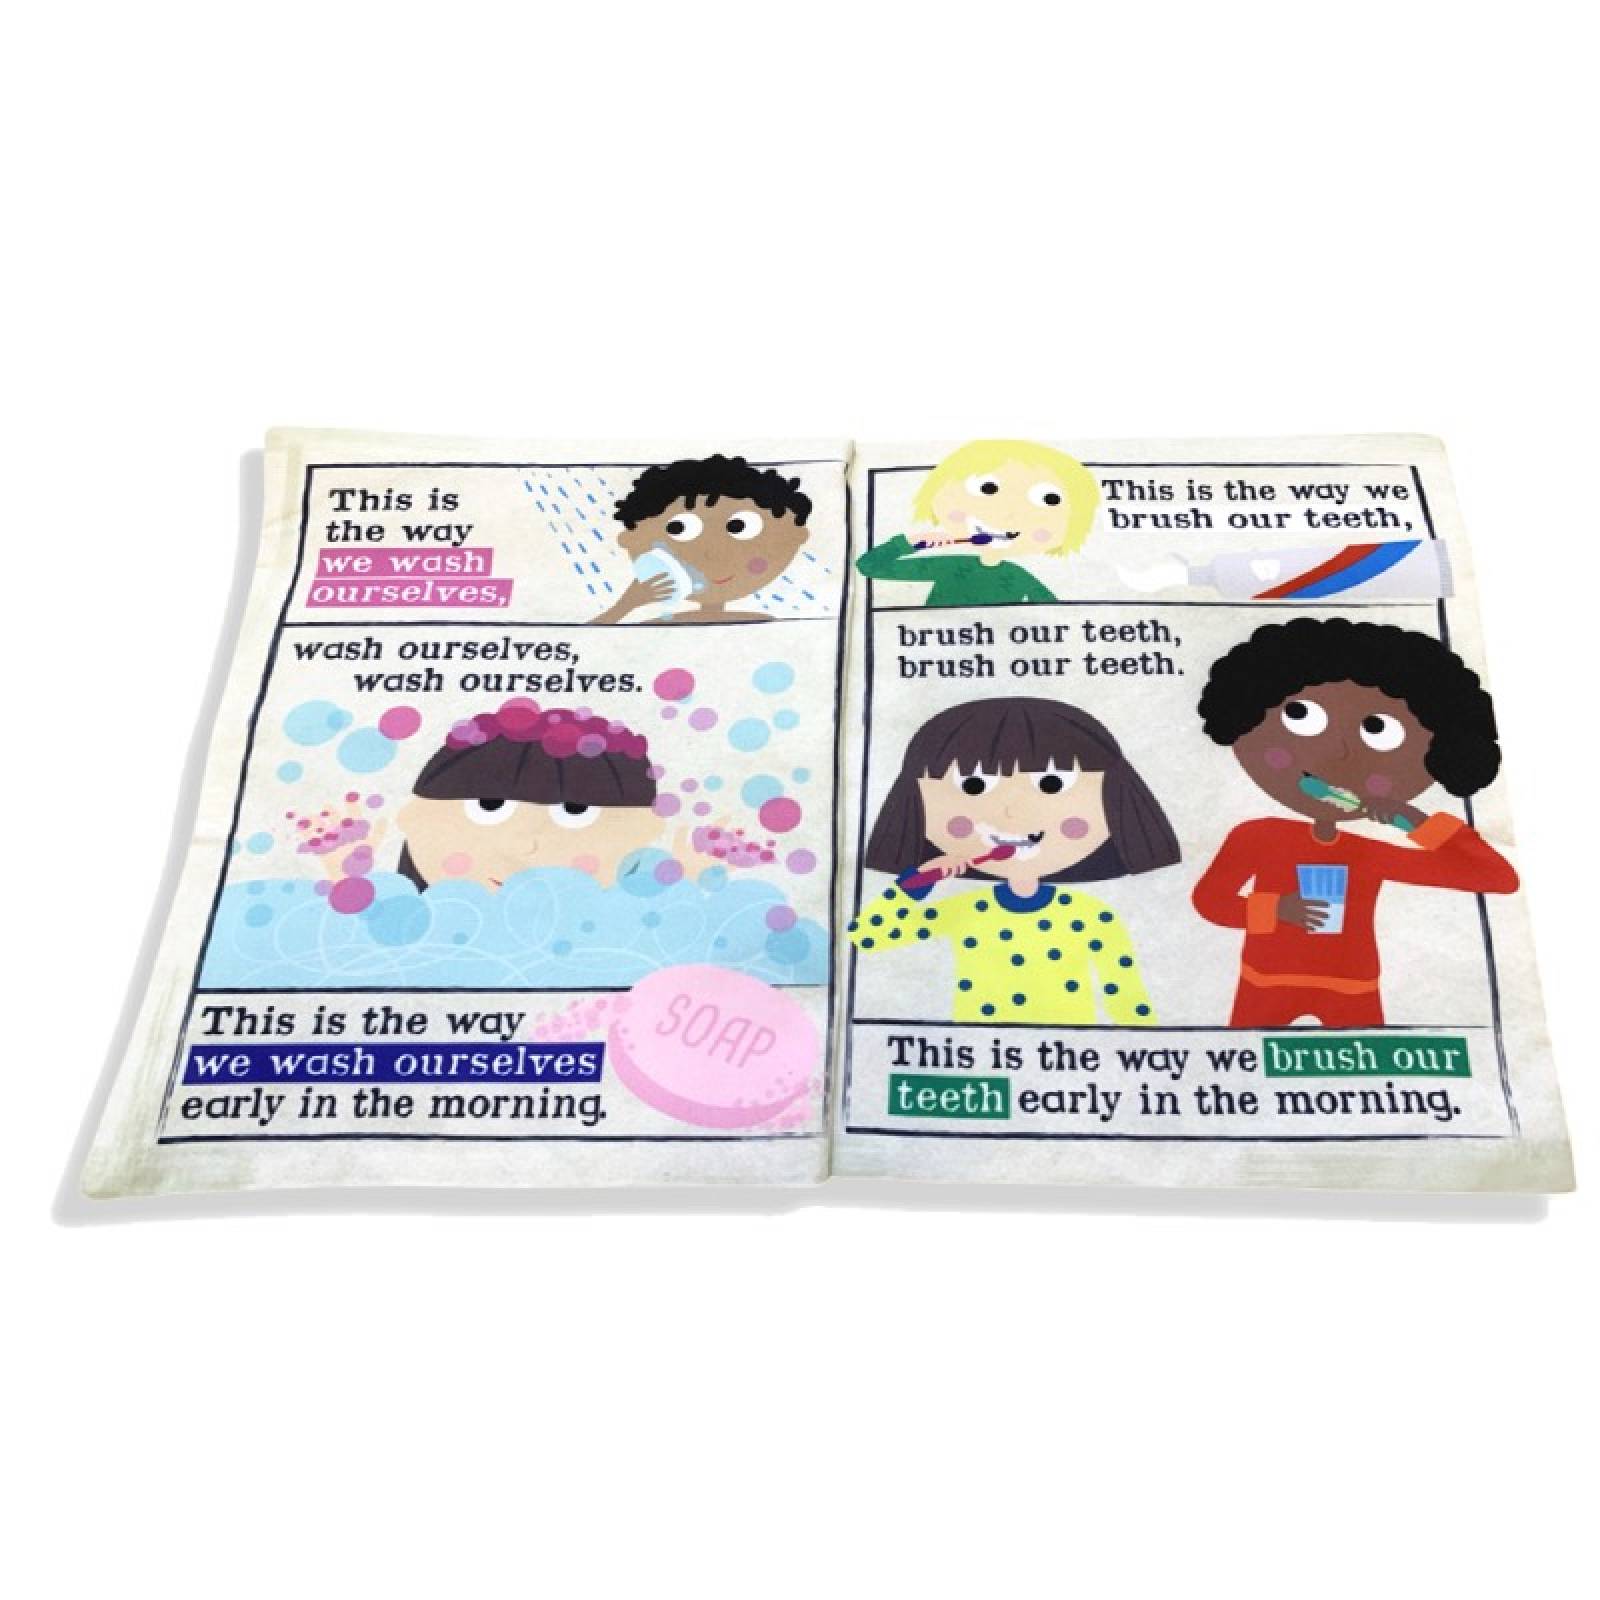 Mulberry Bush - Nursery Times Crinkly Newspaper Baby Toy 0+ thumbnails